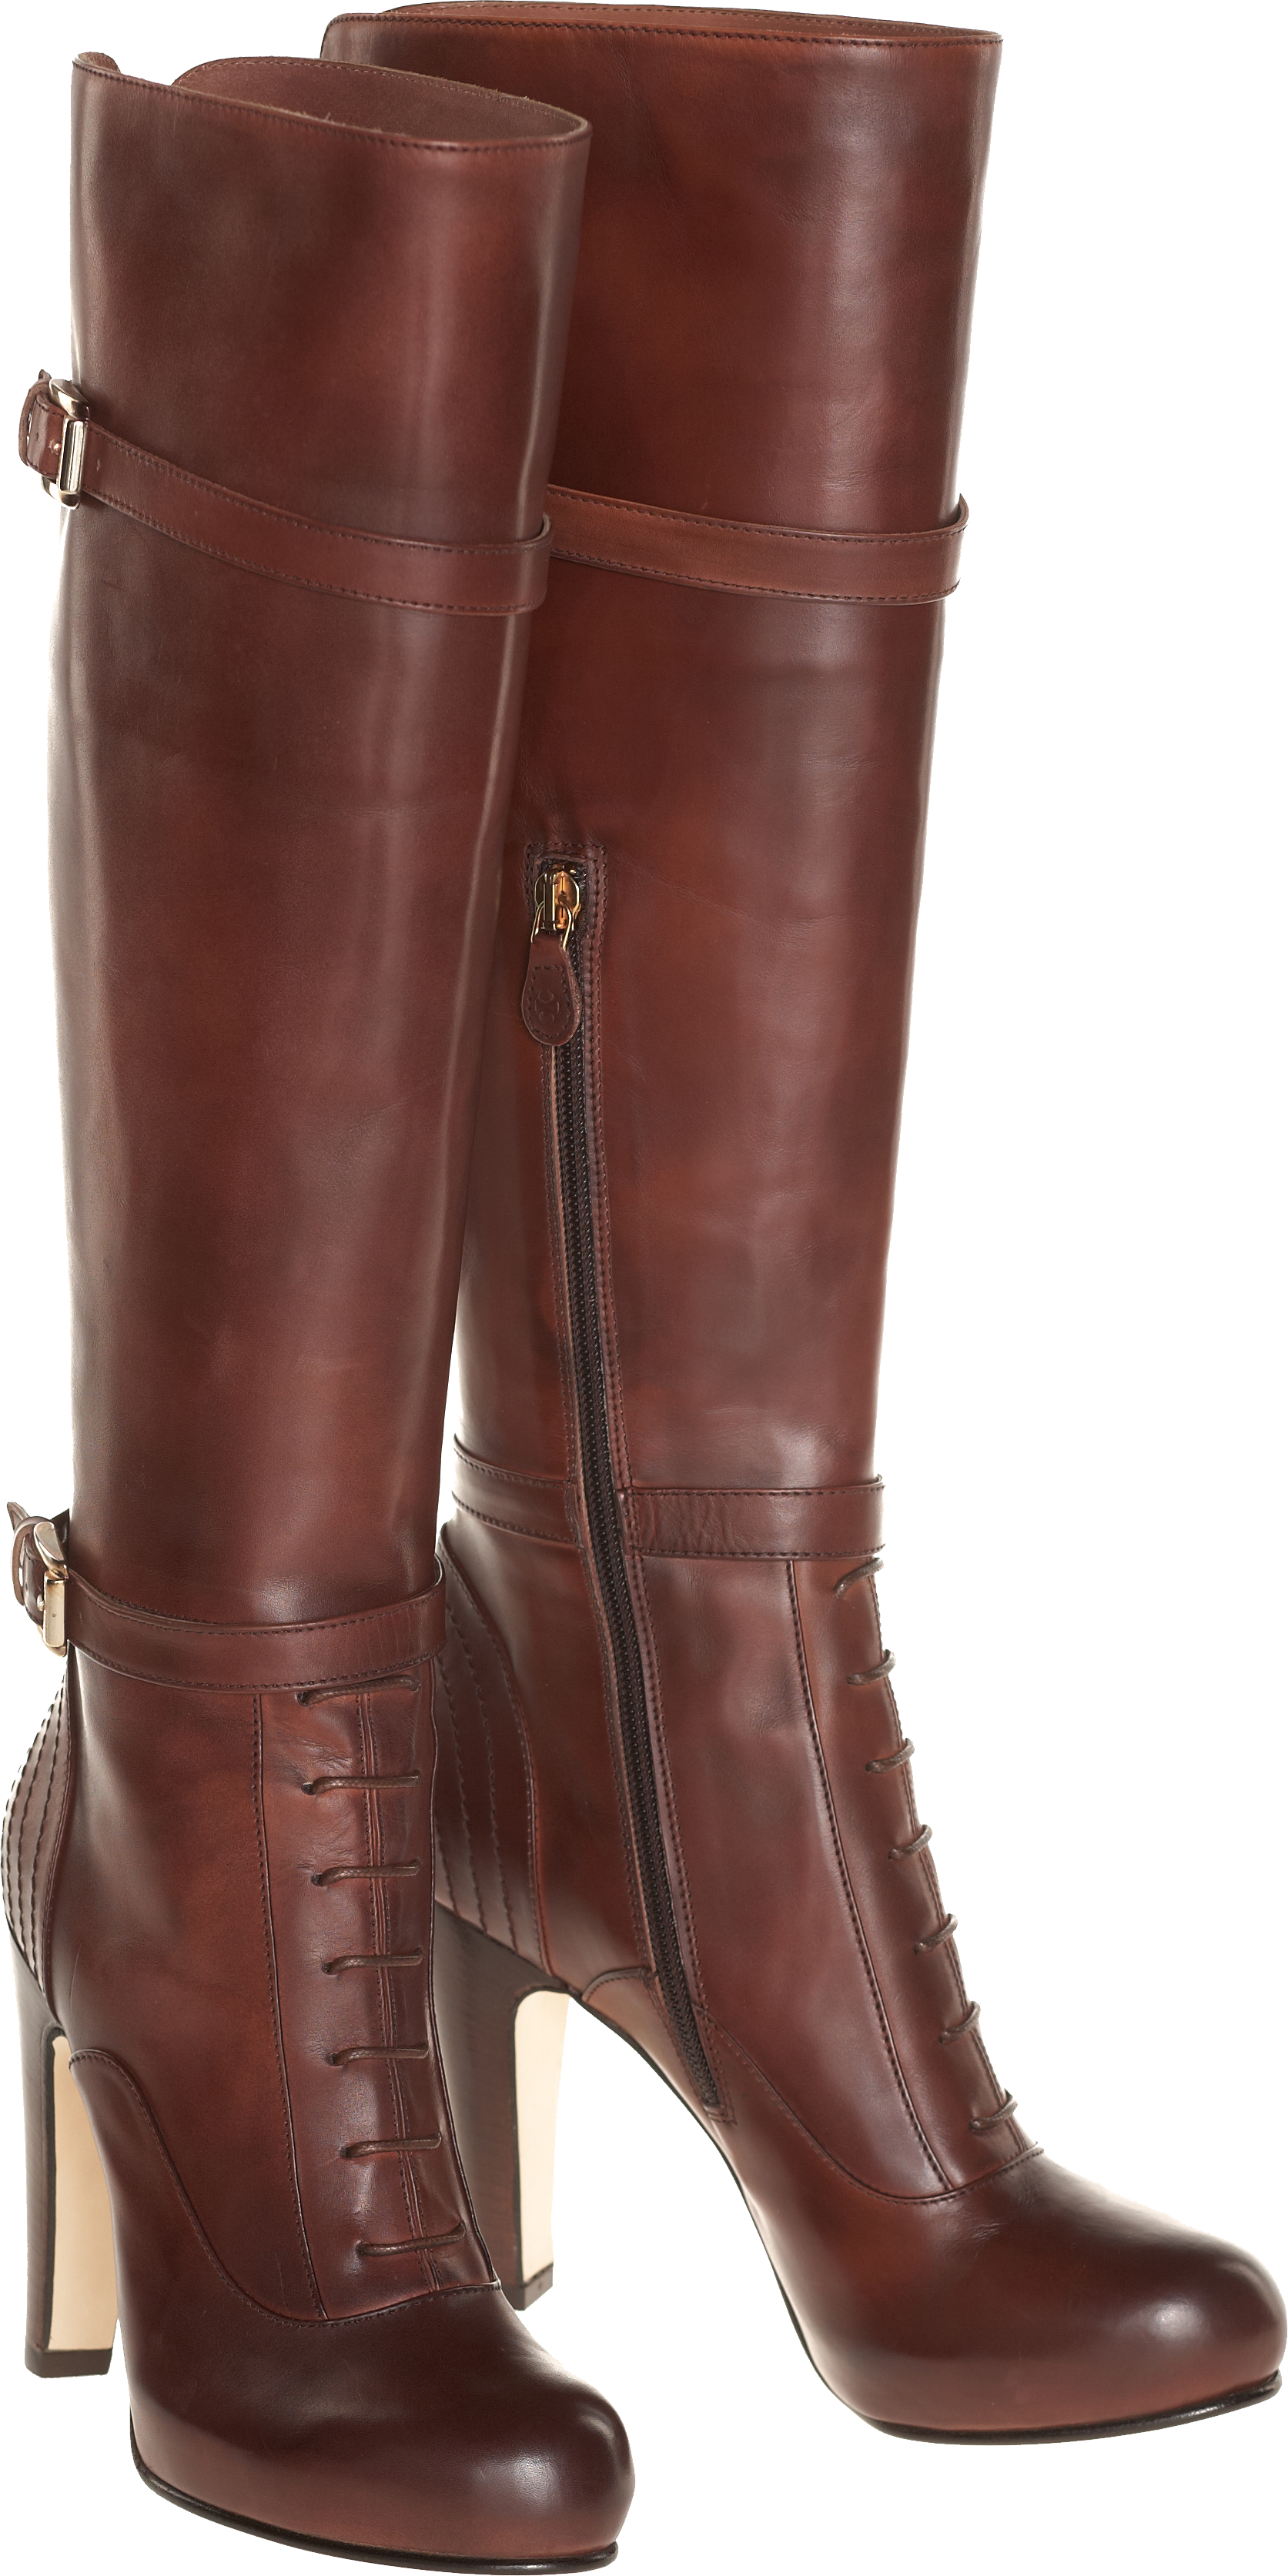 Women’s boot made of genuine Chocolate leather